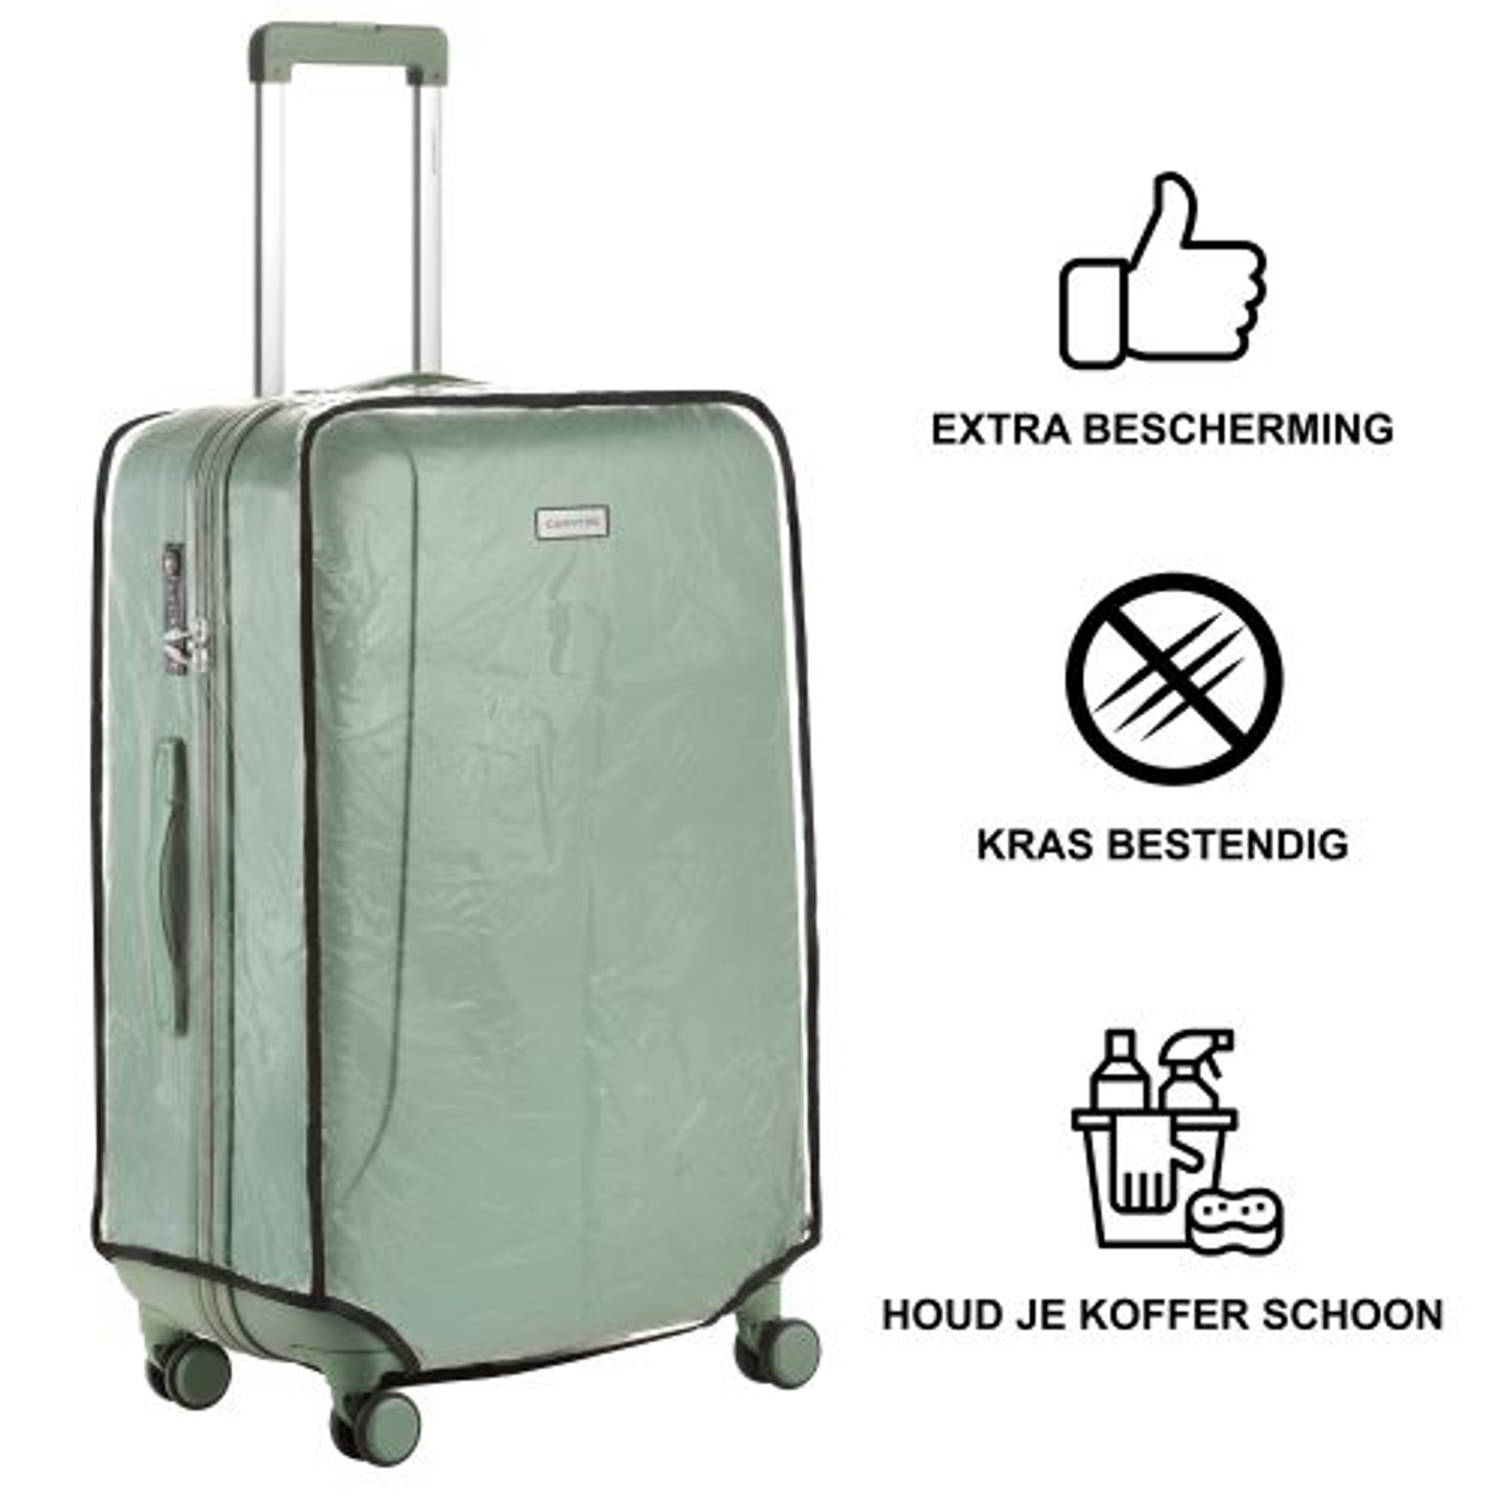 Refrein spiraal Spelling CarryOn Kofferhoes - Beschermhoes koffer - Luggage Cover Large -  Transparant | Blokker